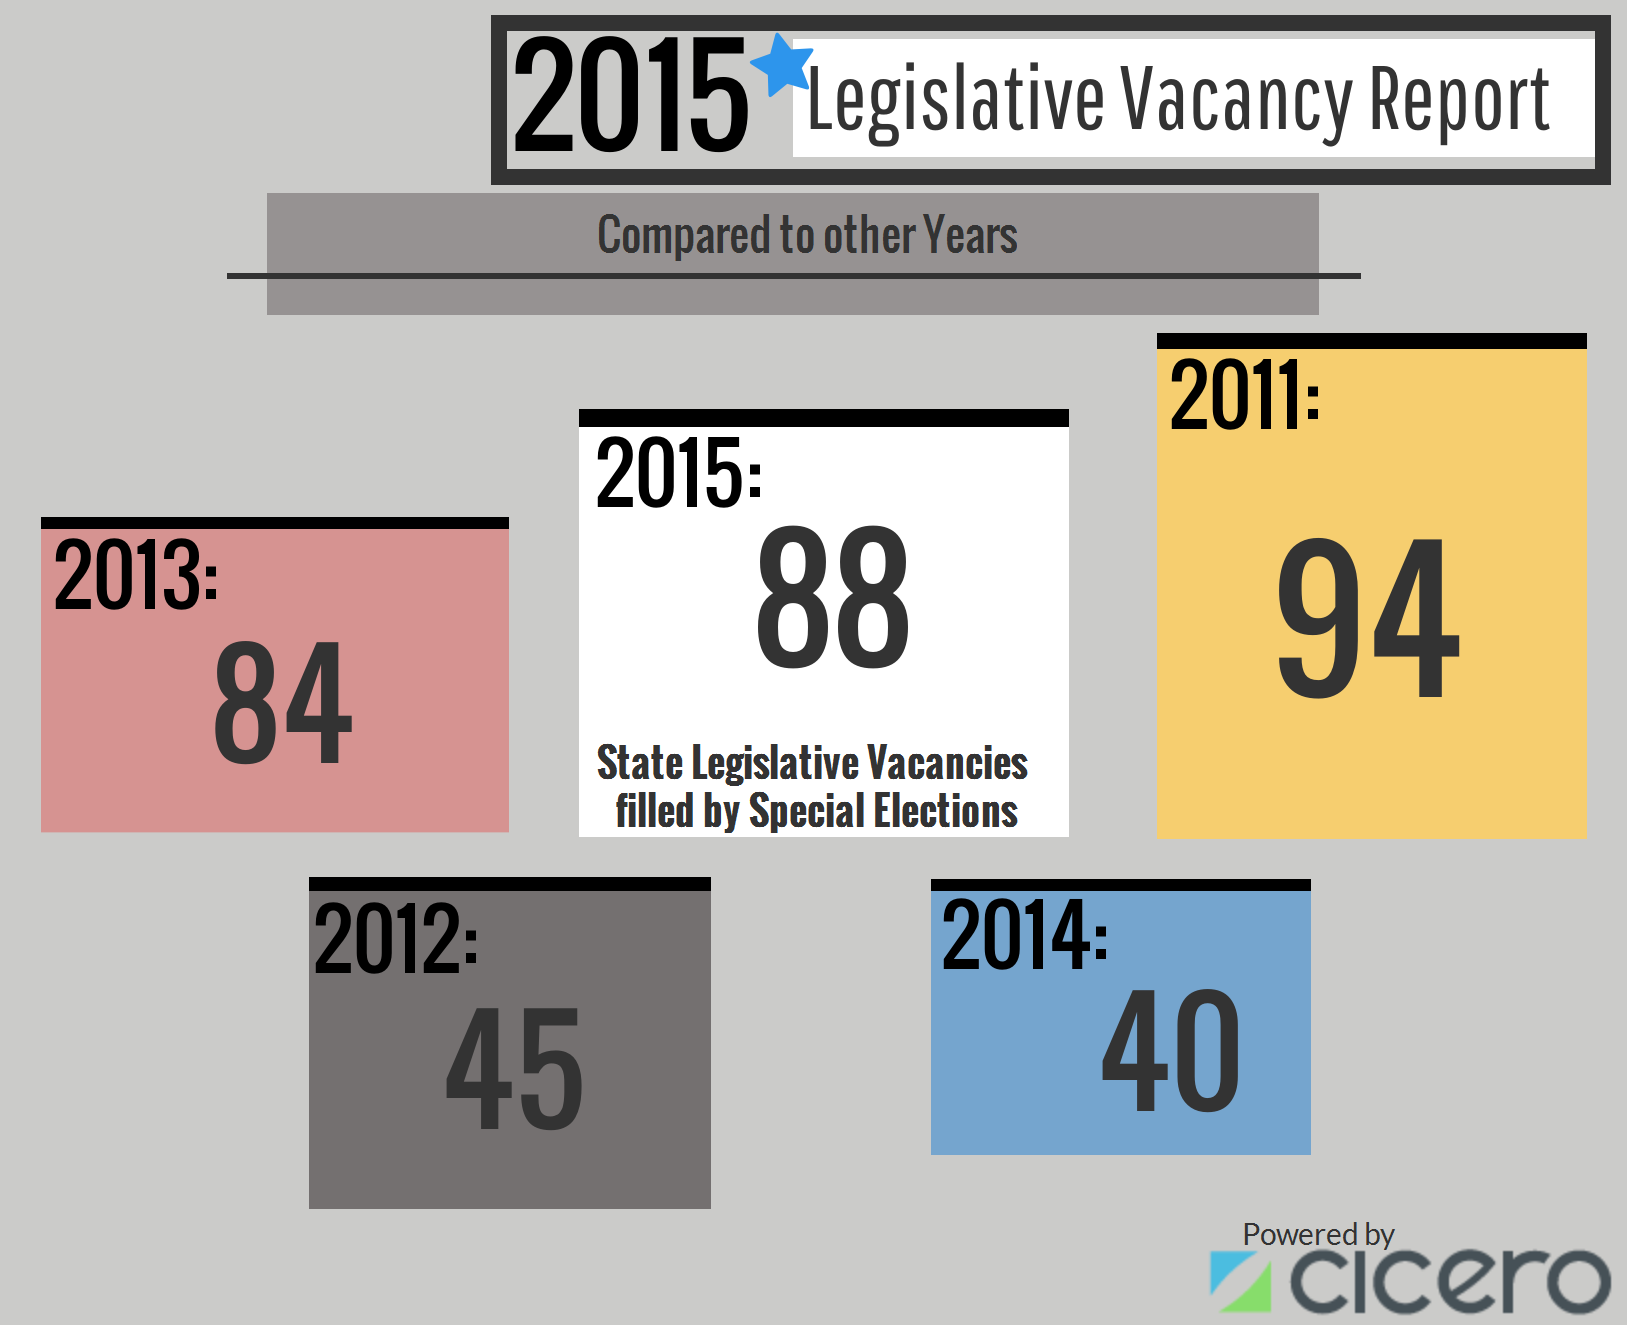 A graphic showing the number of state legislative vacancies in 2015 compared to other years going back to 2011. 2011 had the highest number of vacancies, with 94.